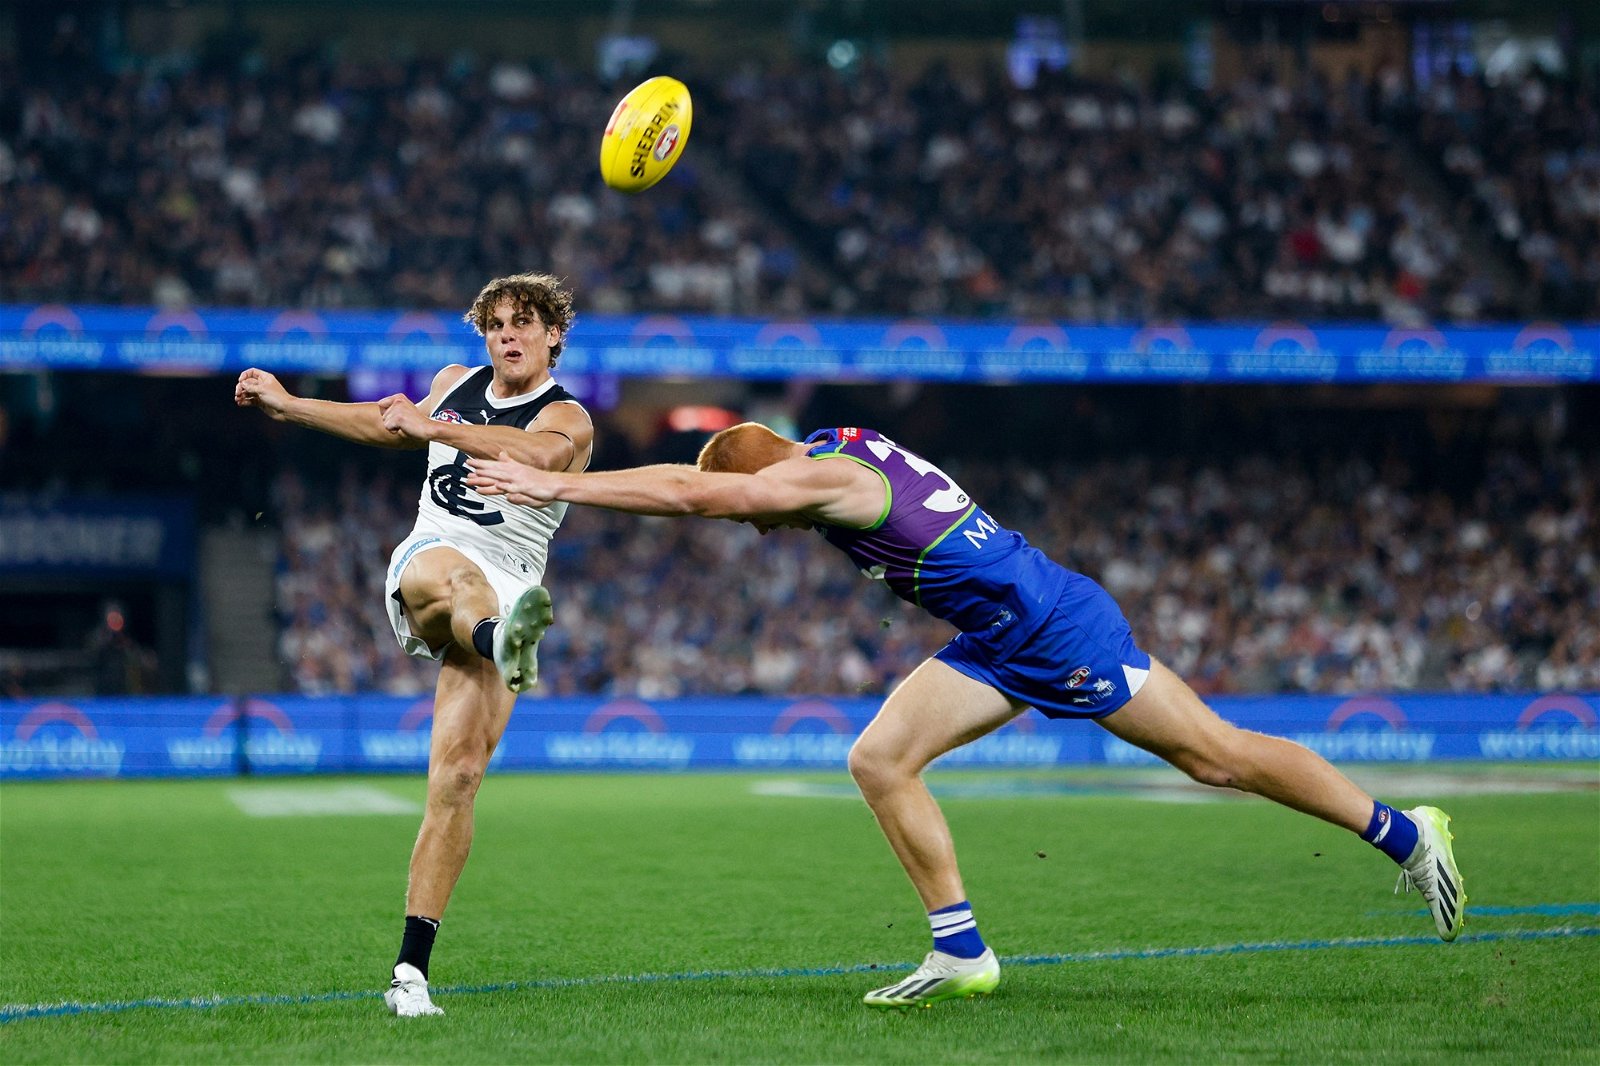 Carlton's Charlie Curnow kicks the ball against North Melbourne at Docklands.